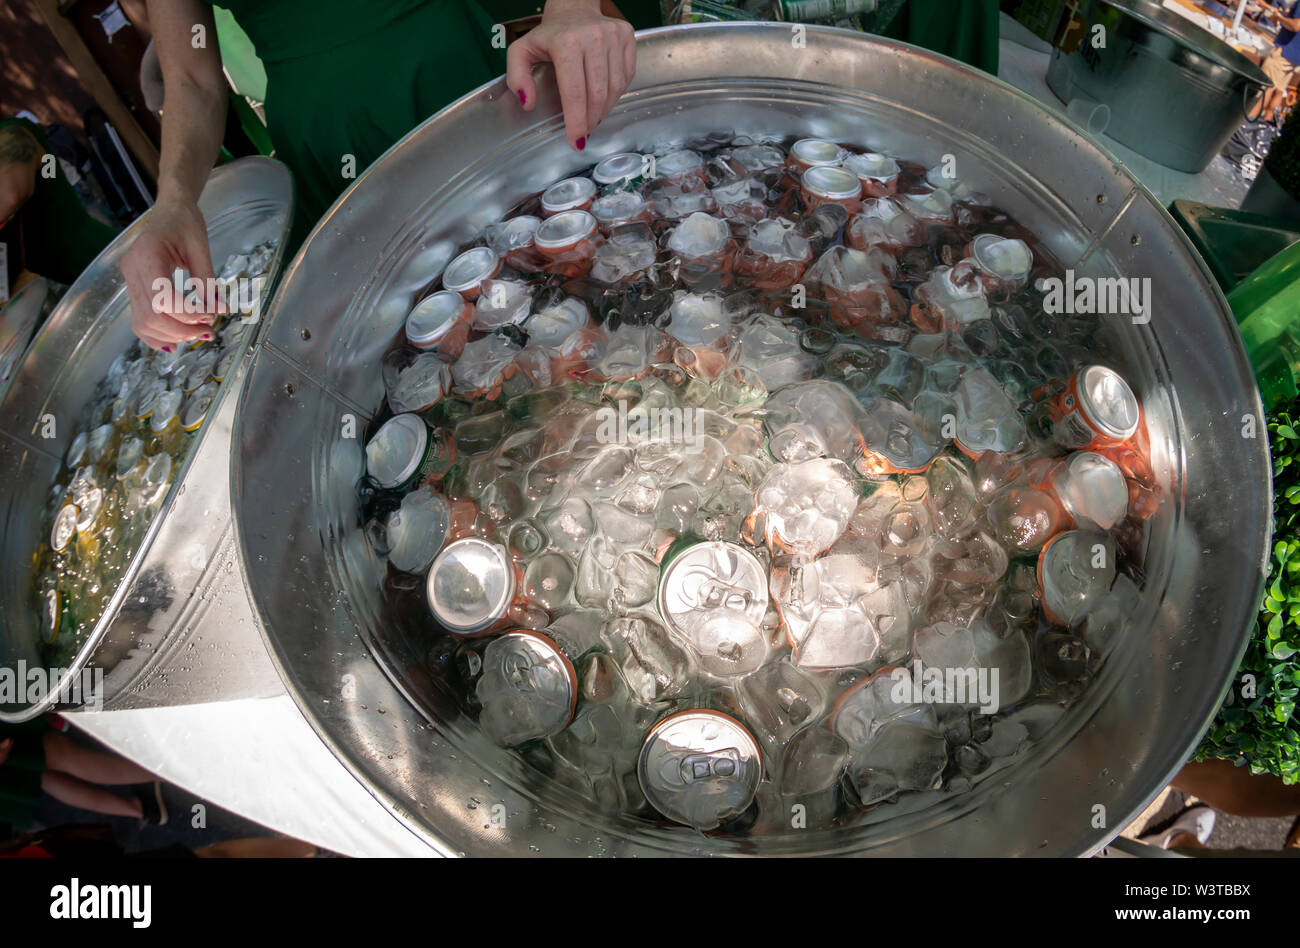 Cans of Perrier juice flavored carbonated water, seen at a street fair in New York on Sunday, July 14, 2019. The new product from Nestlé Waters, Perrier's parent company, addresses the increased popularity of flavored carbonated waters spear-headed by the millennial favorite La Croix. (© Richard B. Levine) Stock Photo